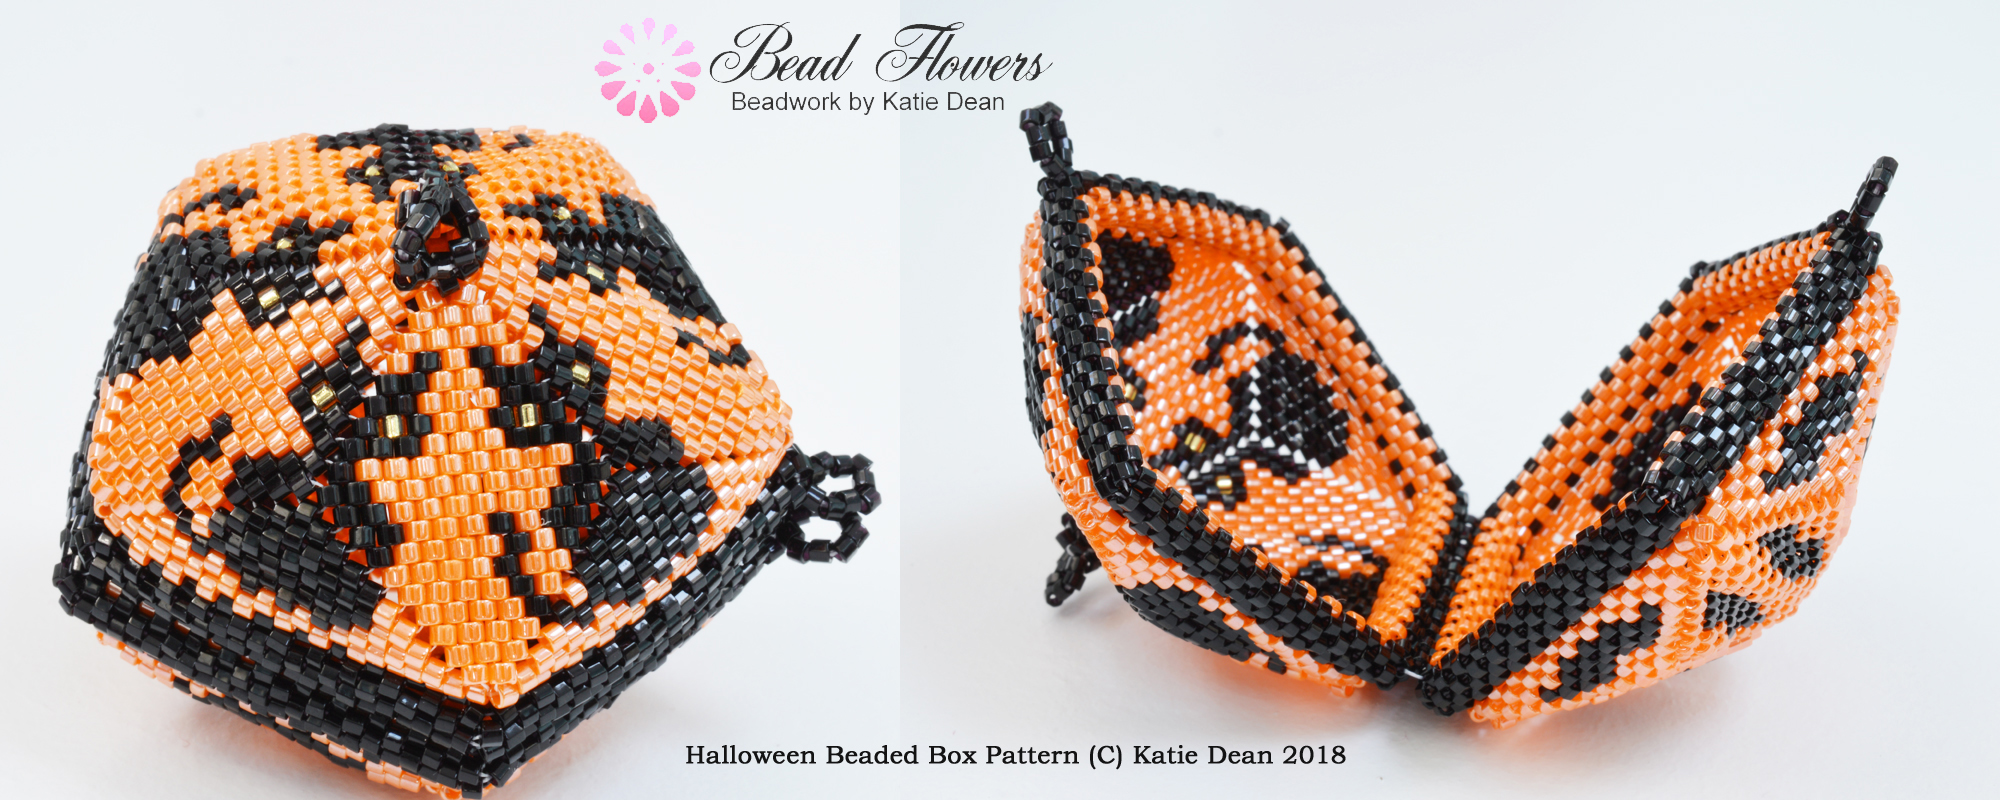 Beaded box baubles, Halloween beading projects, Katie Dean